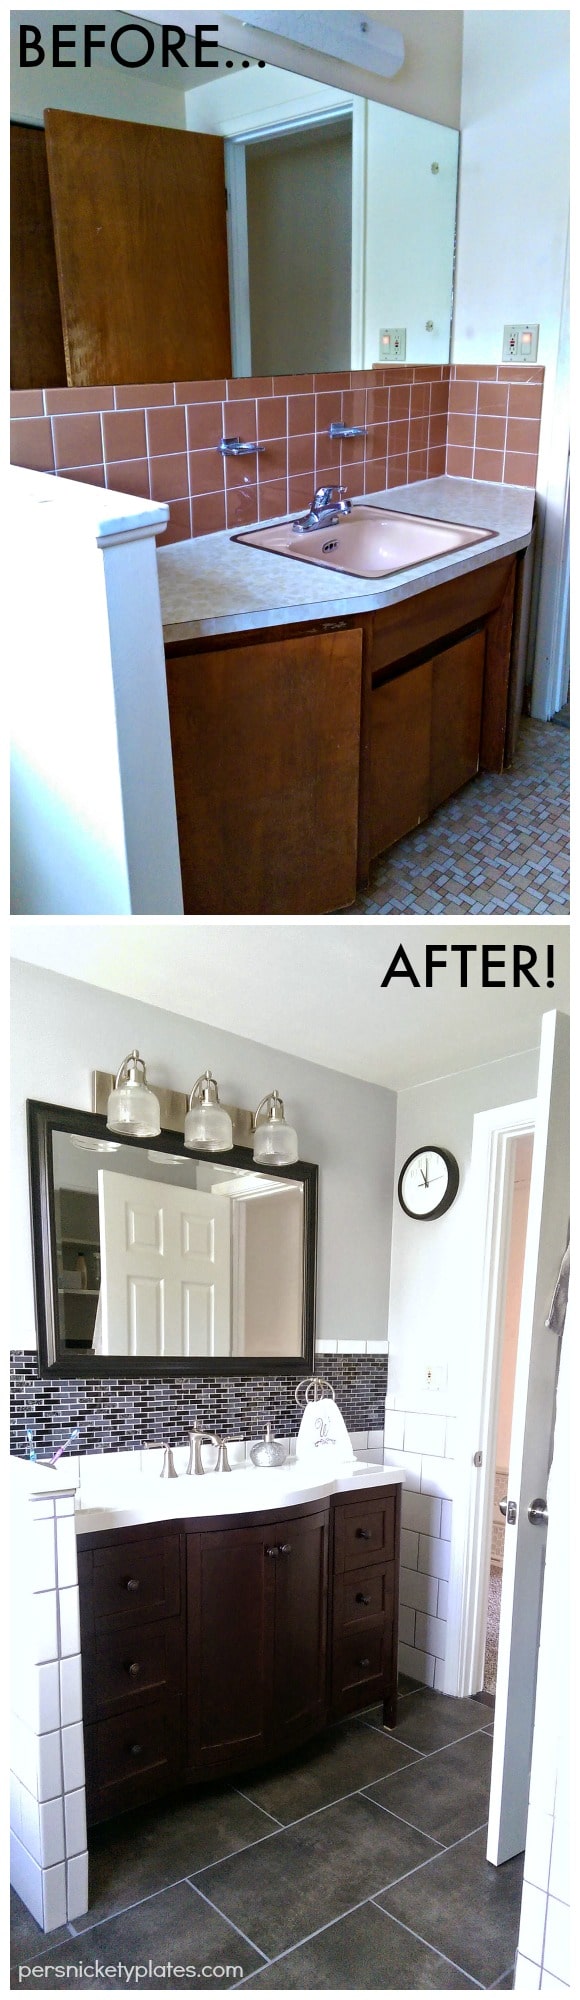 Average sized bathroom before and after pictures | Persnickety Plates